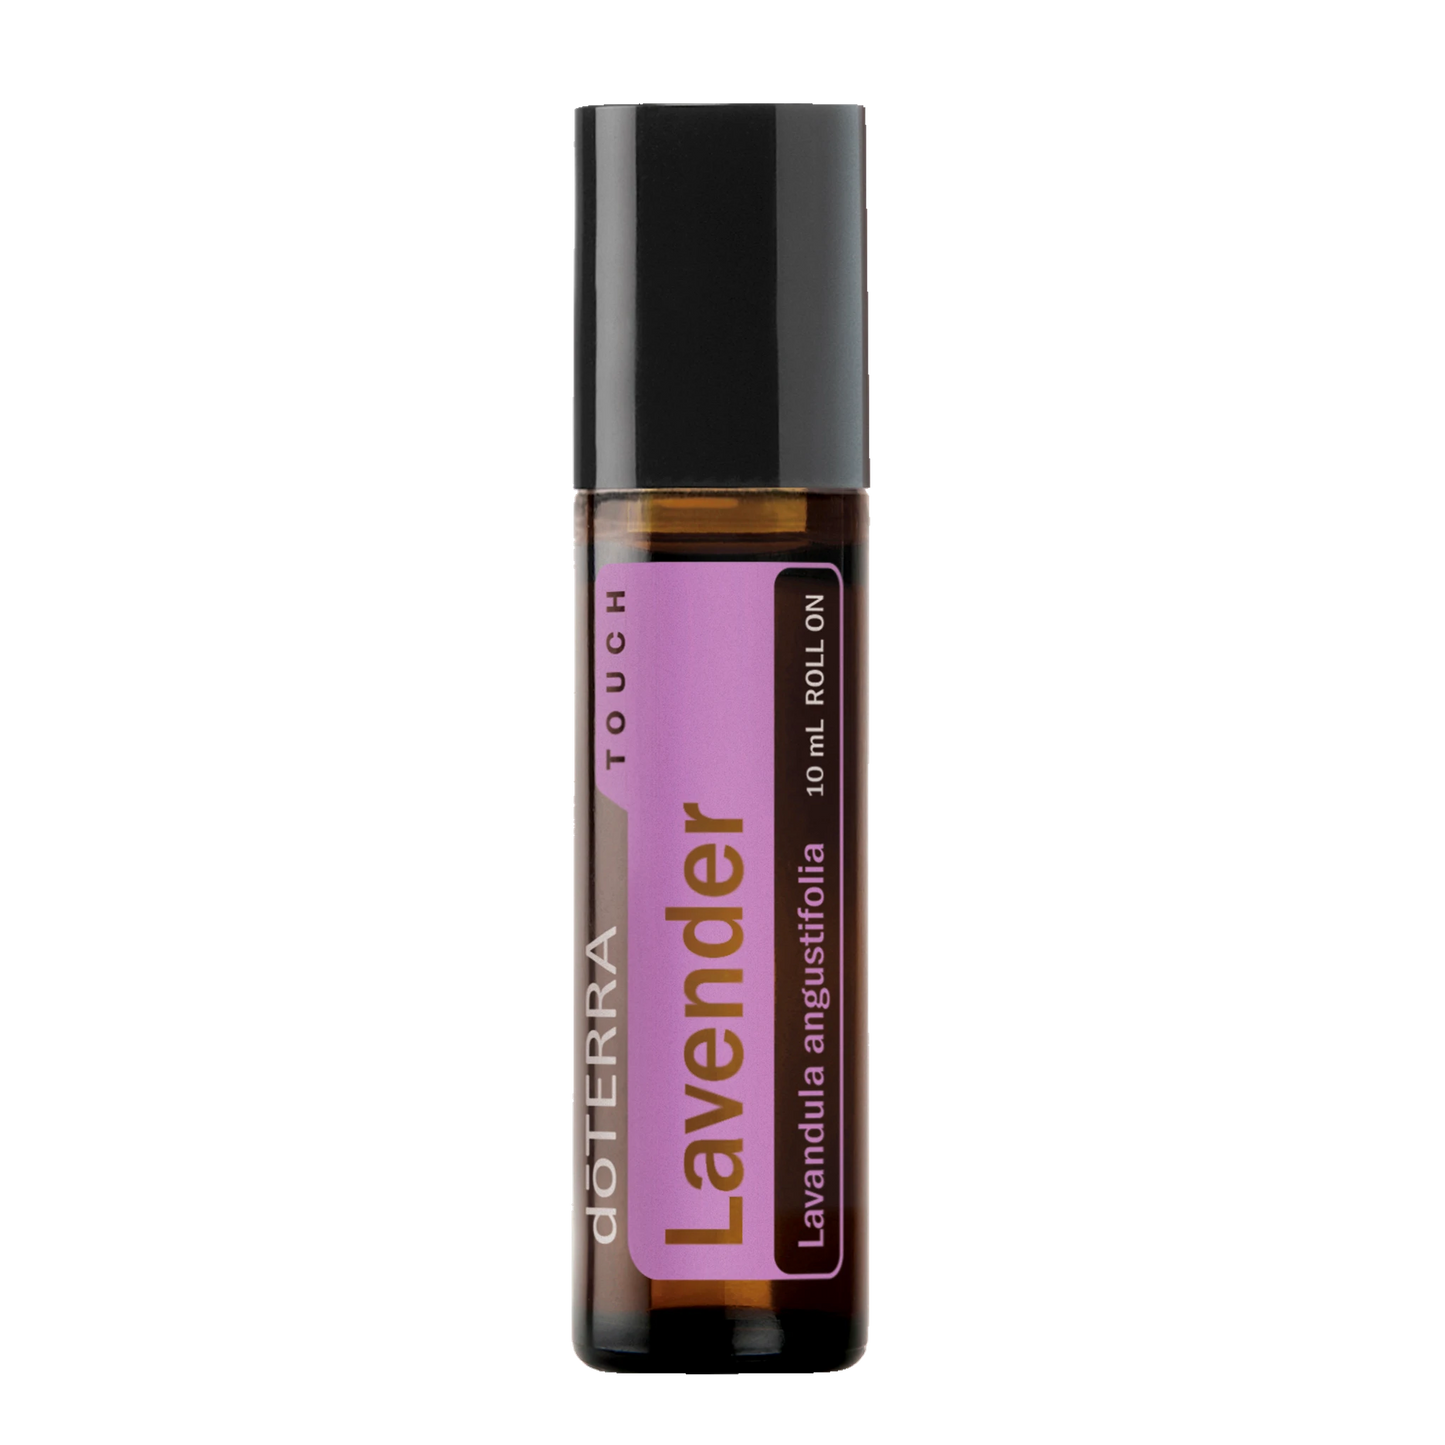 Lavender Touch Essential Oil 10ml Roll On